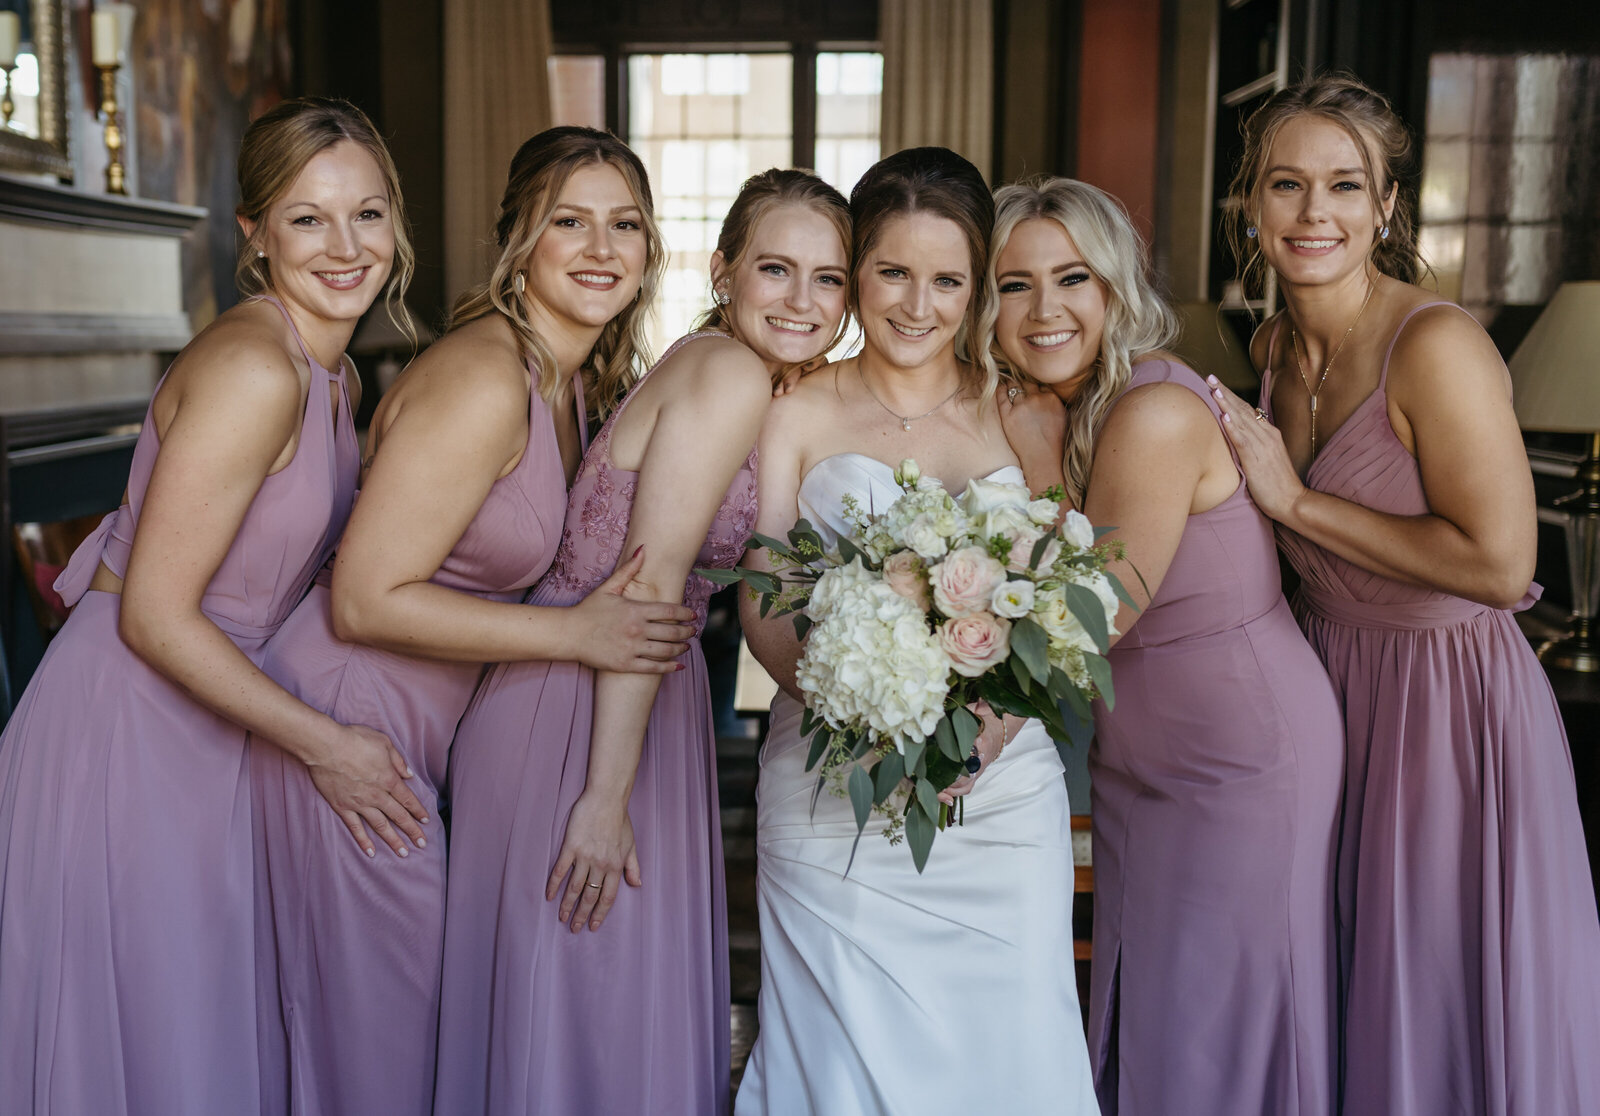 A bride smiles with her bridesmaids in a hotel